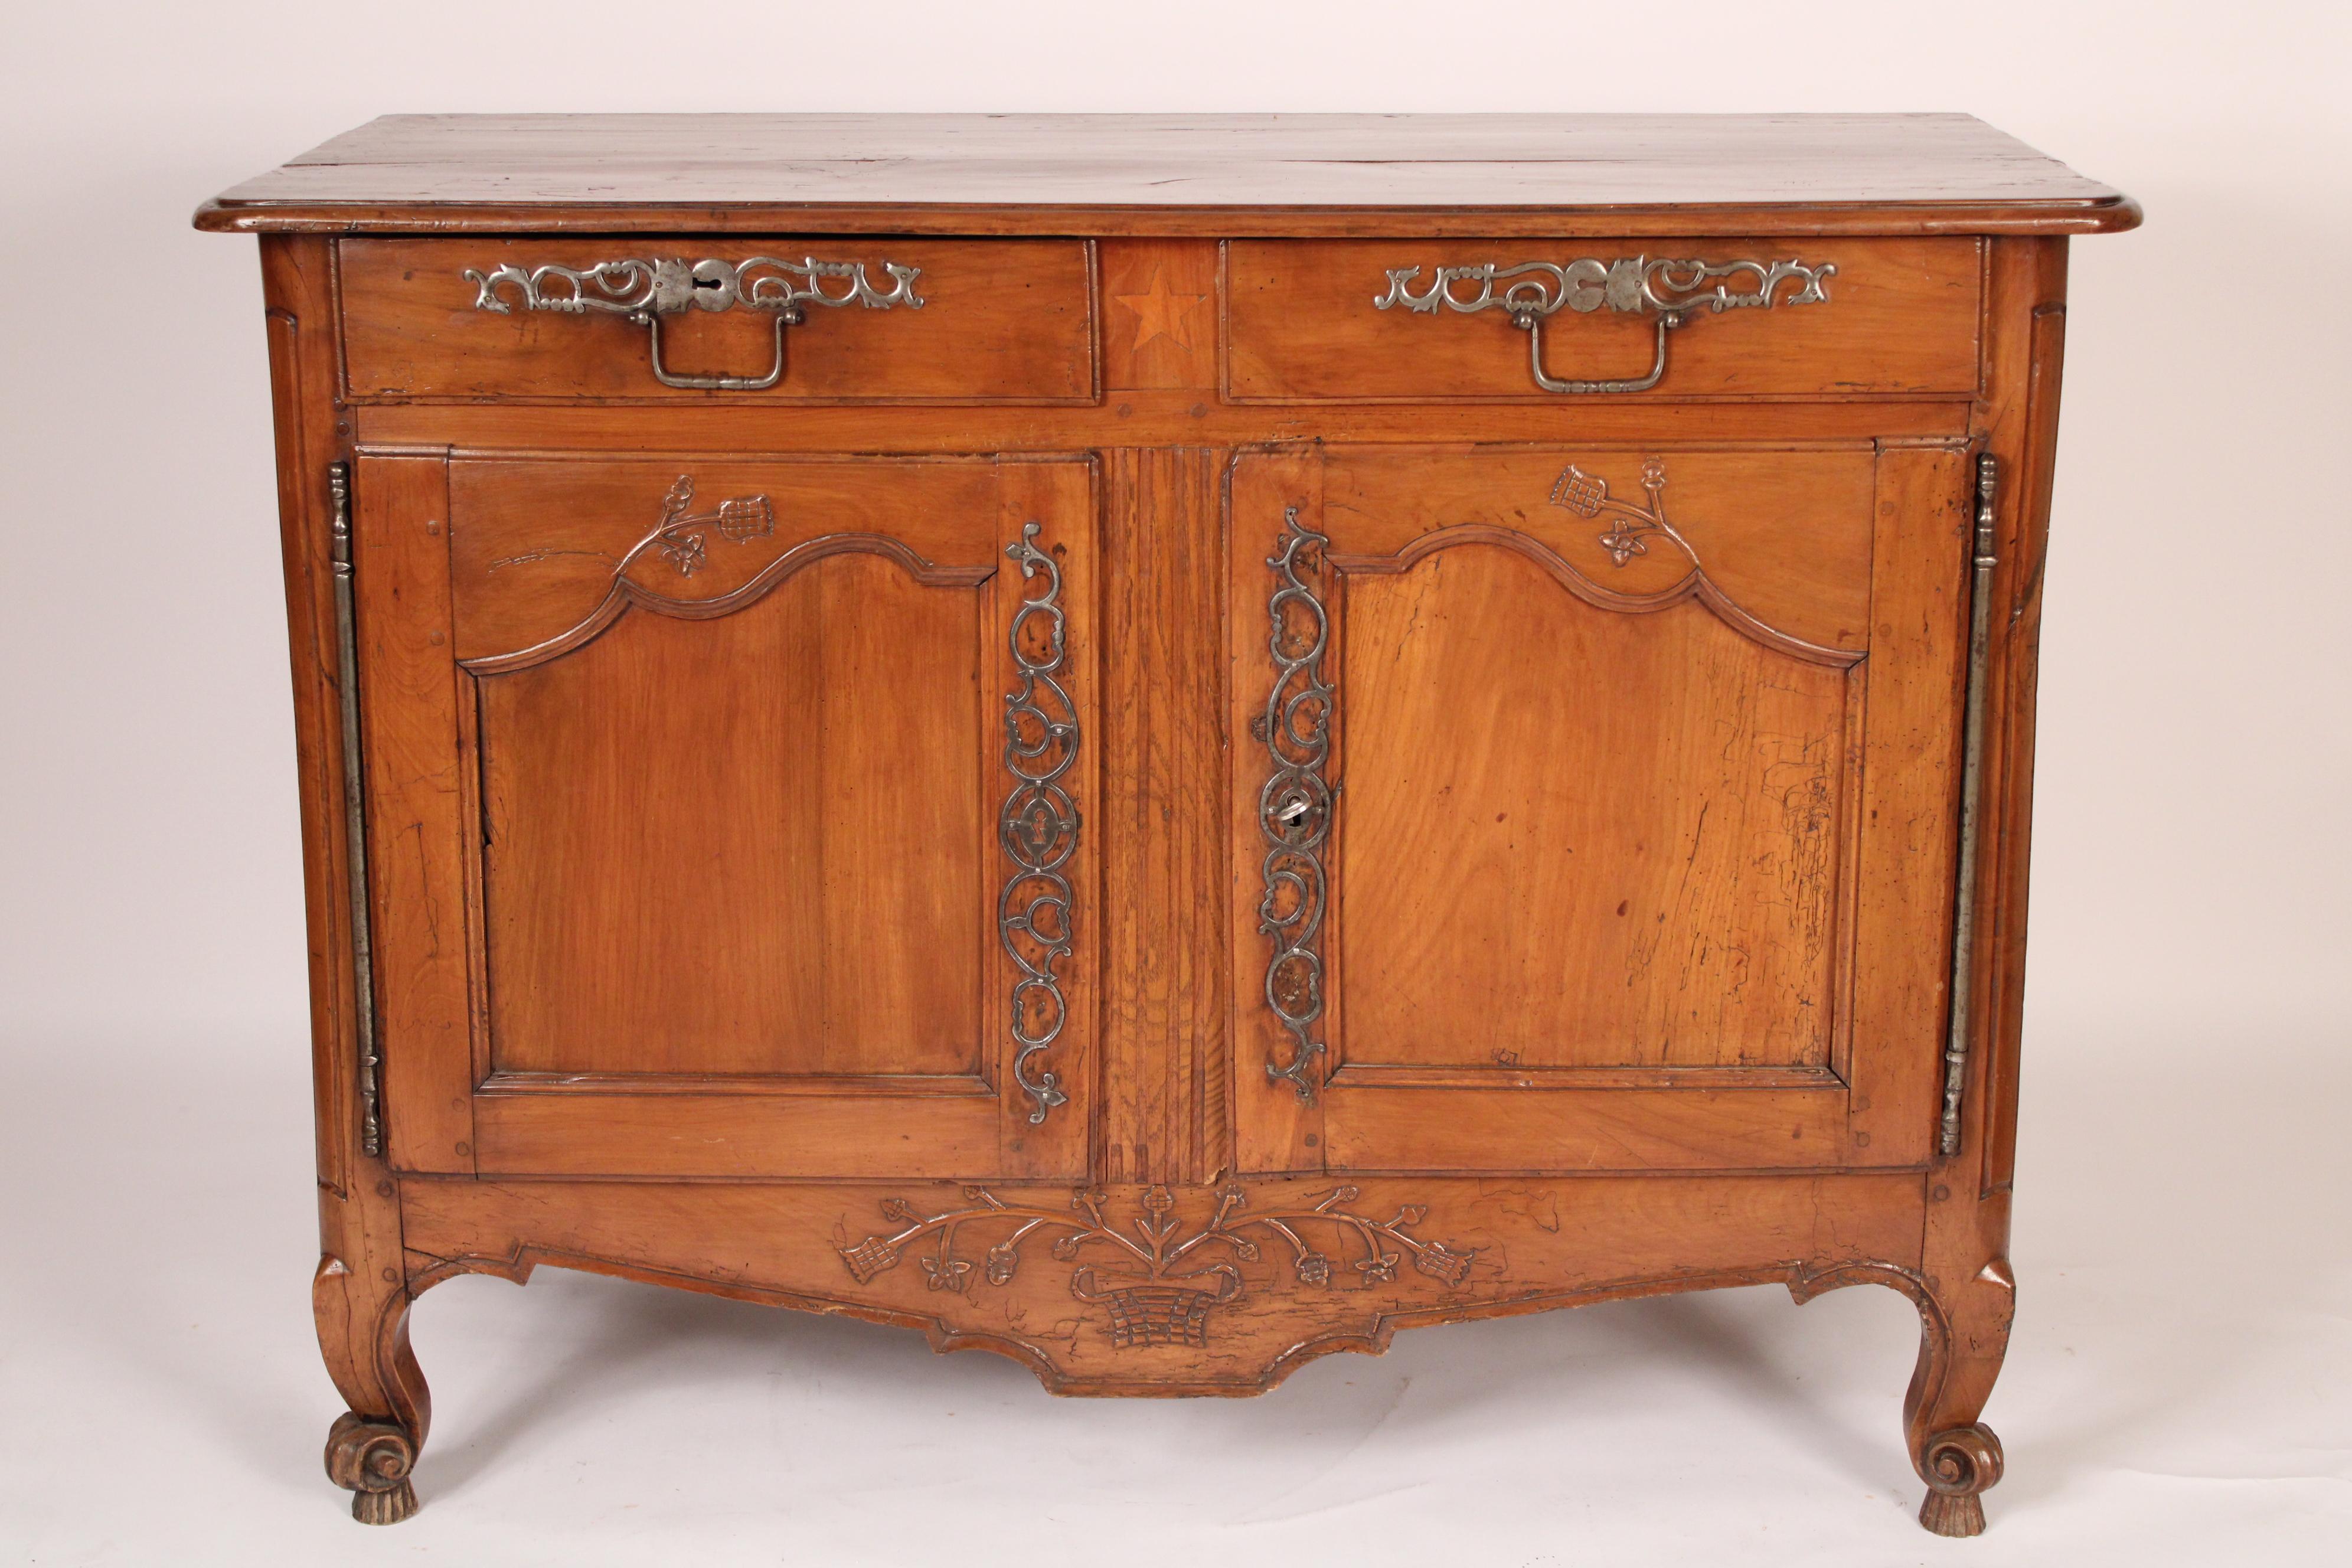 Antique Louis XV style provincial fruitwood buffet, 19th century. With a 3 board rectangular top with rounded front corners, 2 frieze drawers with iron hardware over two fruitwood doors with inset panels, resting on French fiddle feet.